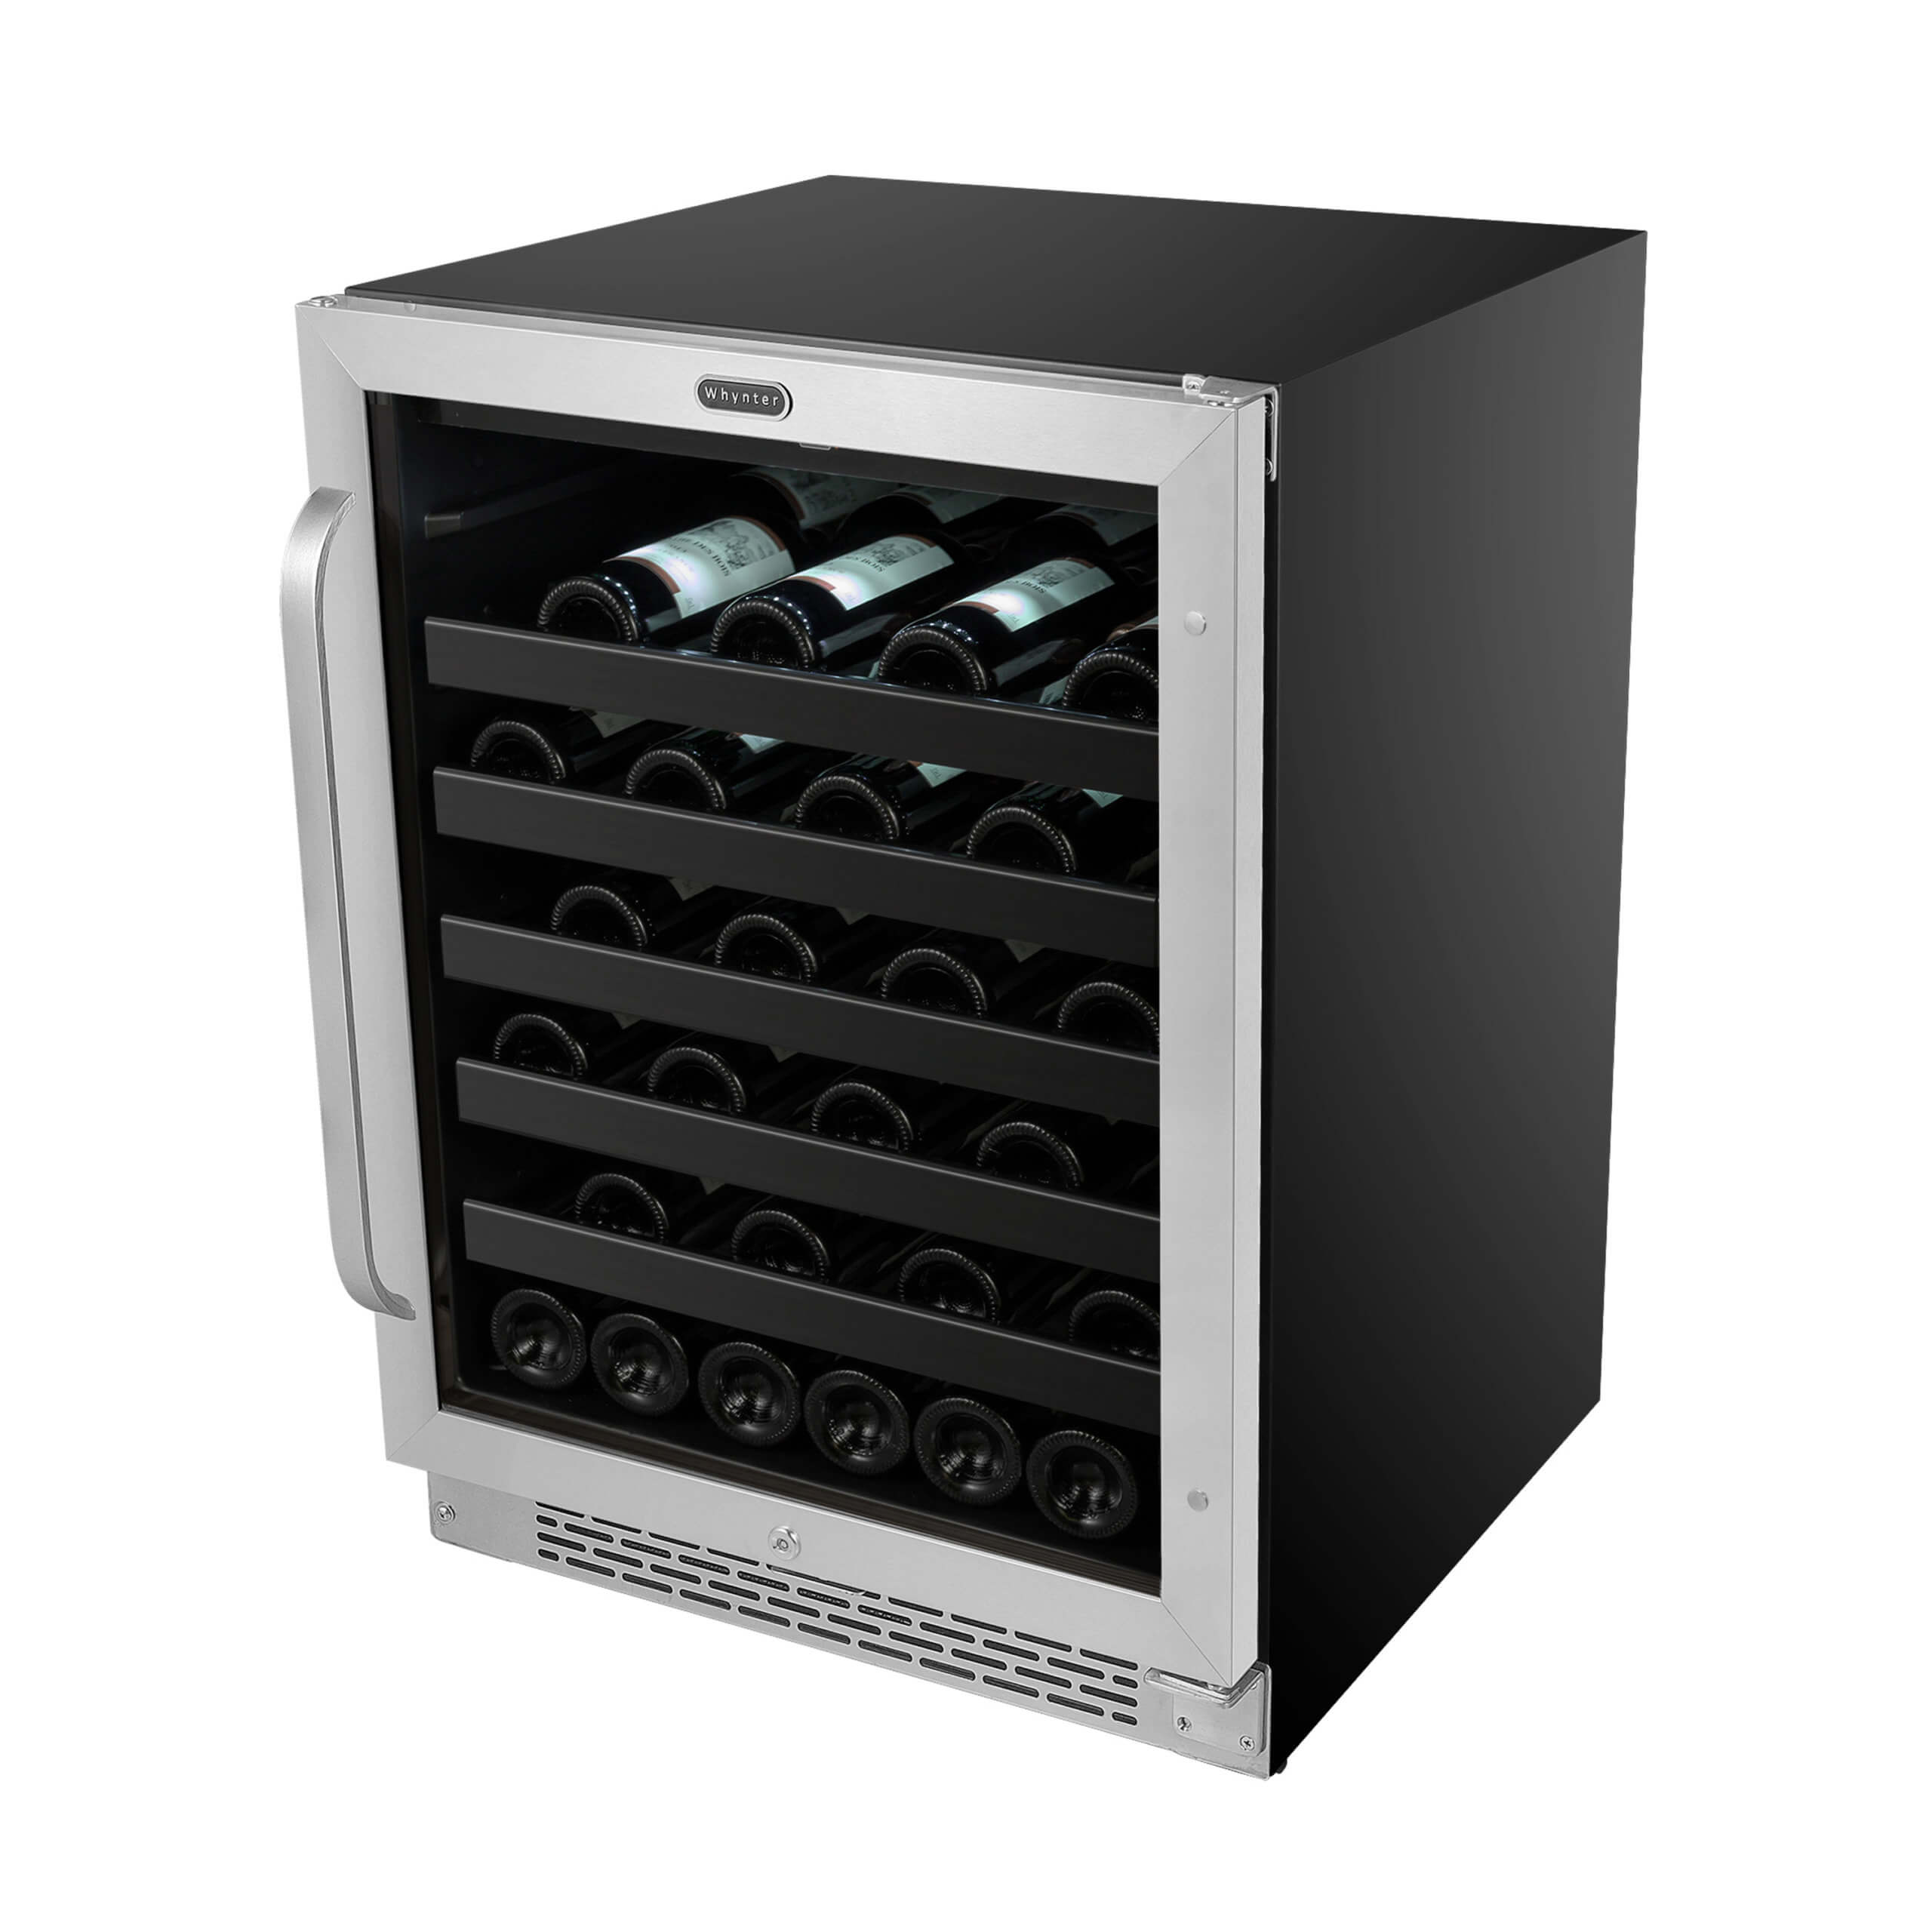 Whynter - 24" 46-Bottle Single-Zone Built-in Undercounter Stainless Steel Wine Cooler (BWR-408SB)